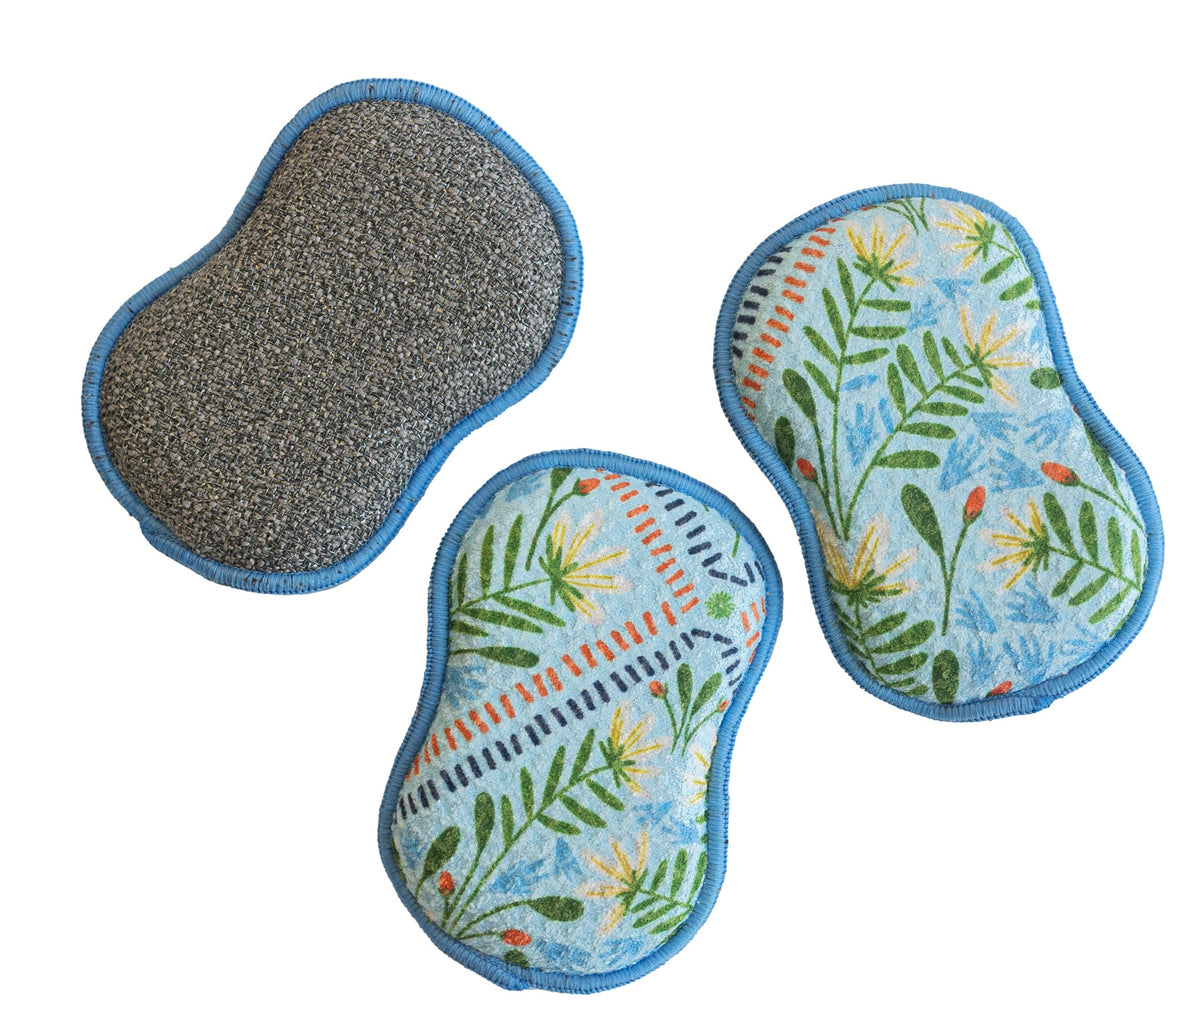 RE:usable Sponges (Set of 3) - RJW Upward Sponges &amp; Scouring Pads Once Again Home Co.   